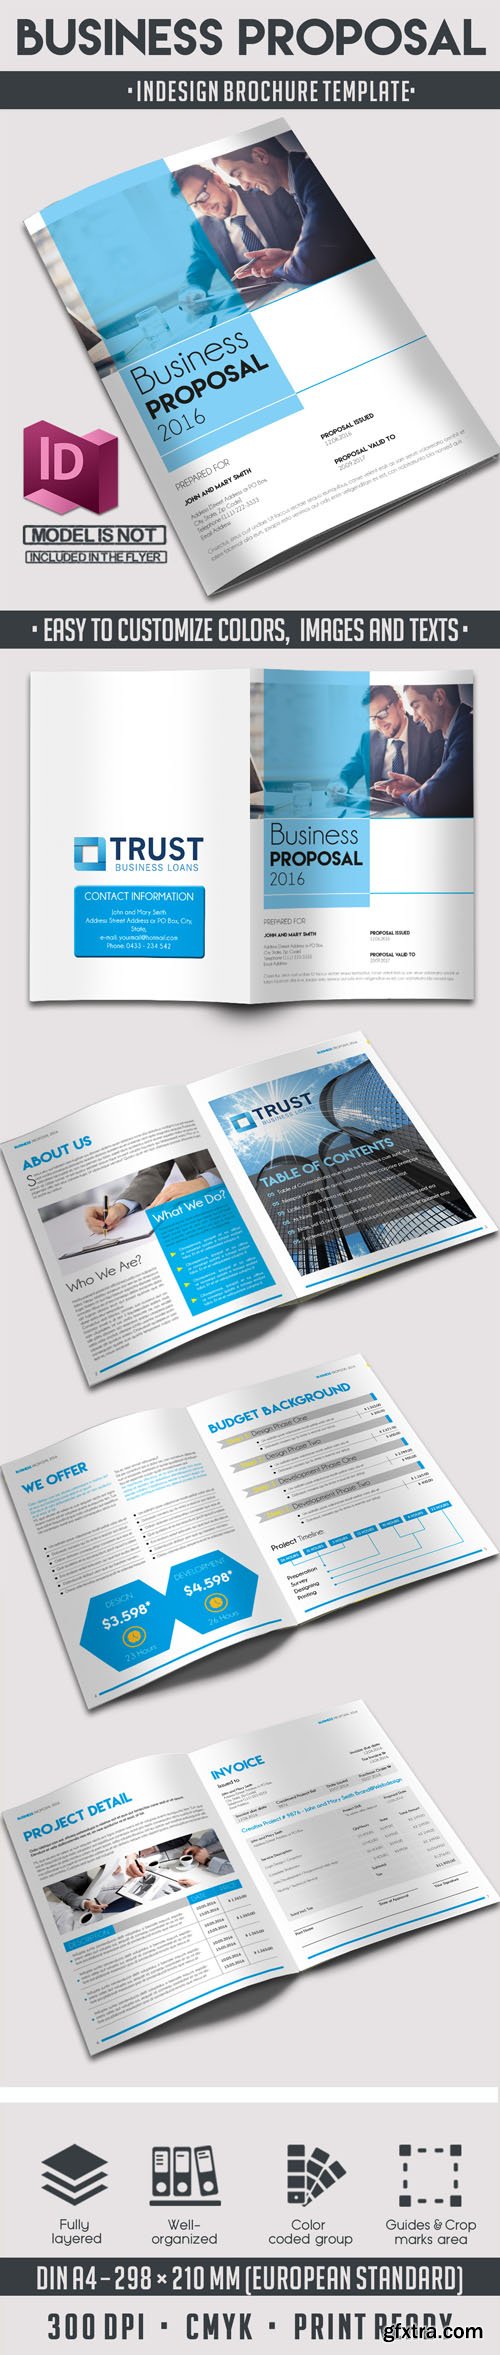 8 Pages Business Proposal Indesign A4 Brochure INDD Template